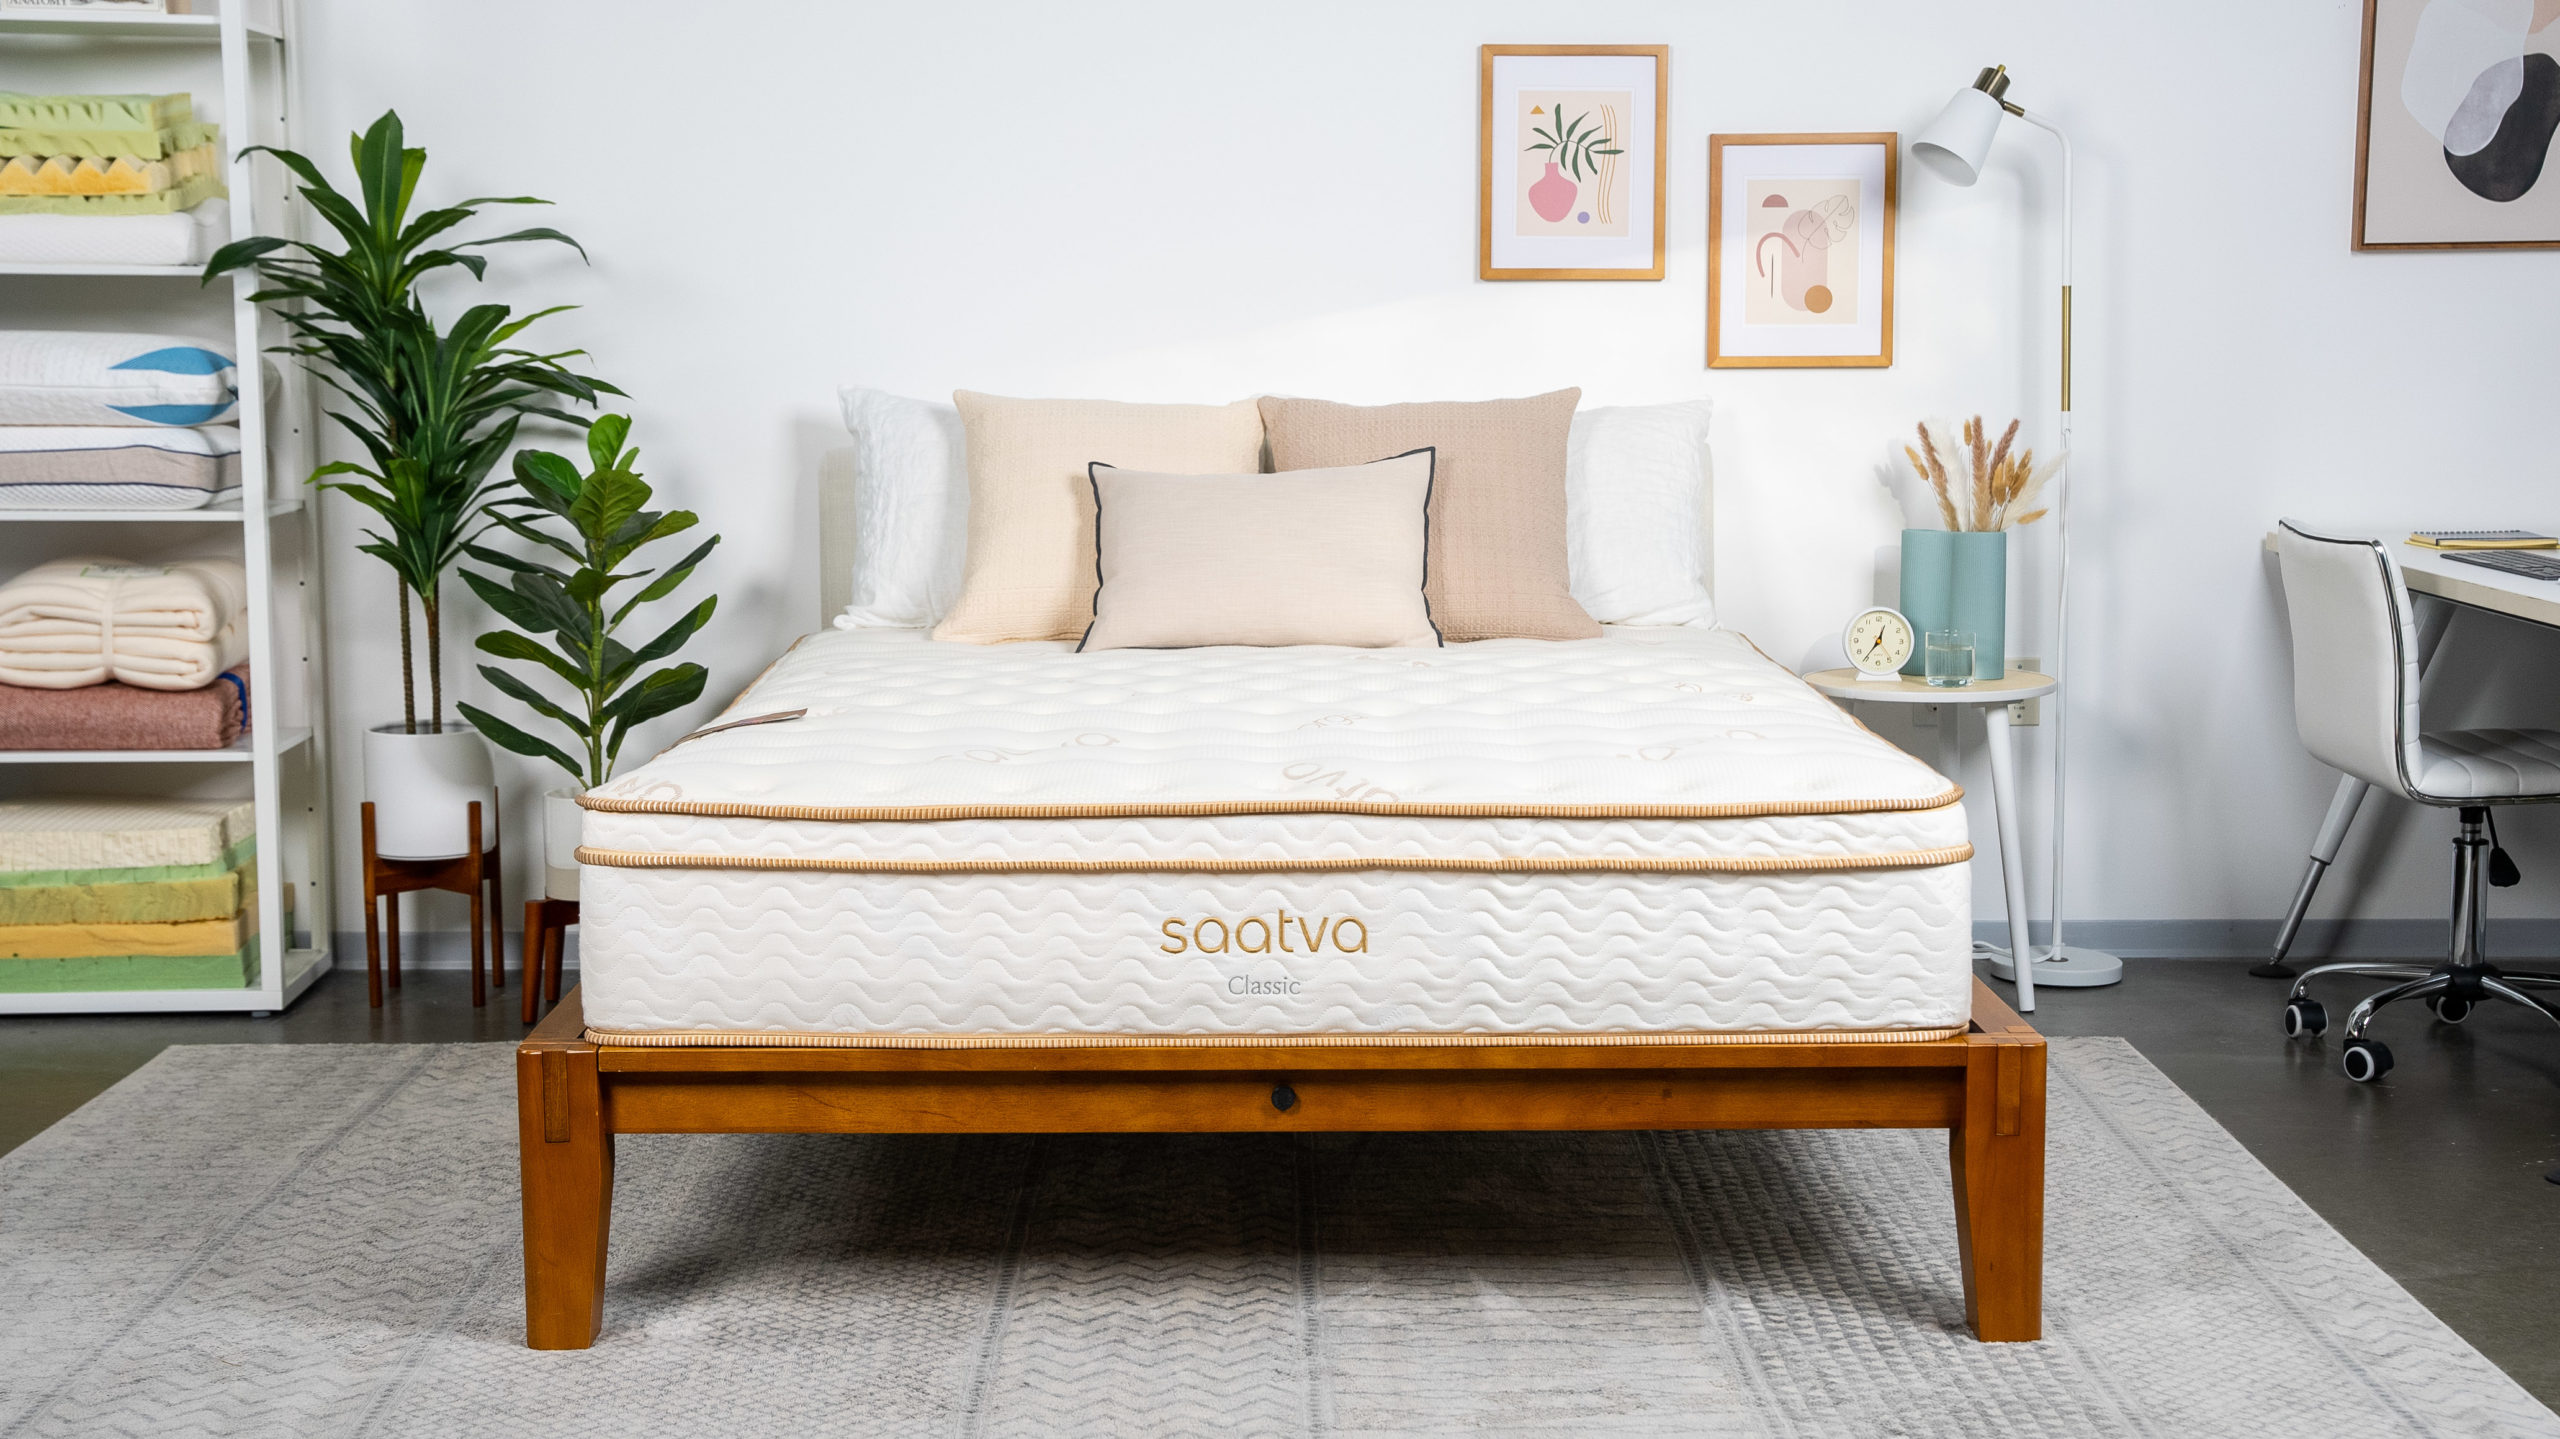 Saatva Mattress Review Ratings From The Test Lab